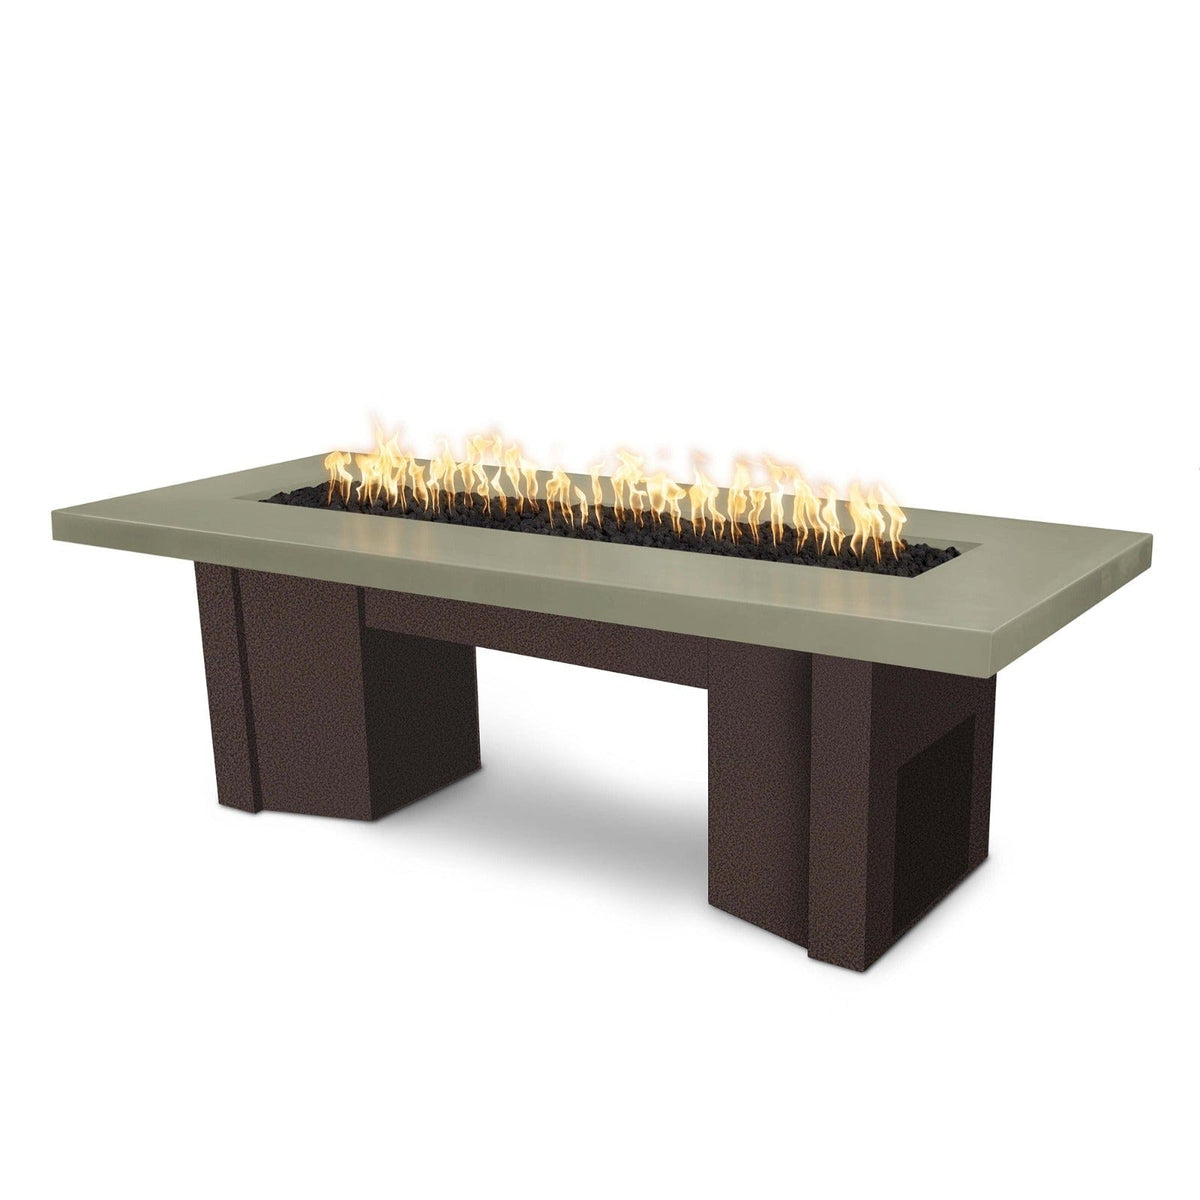 The Outdoor Plus Fire Features Ash (-ASH) / Copper Vein Powder Coated Steel (-CPV) The Outdoor Plus 78&quot; Alameda Fire Table Smooth Concrete in Natural Gas - 110V Plug &amp; Play Electronic Ignition / OPT-ALMGFRC78EKIT-NG